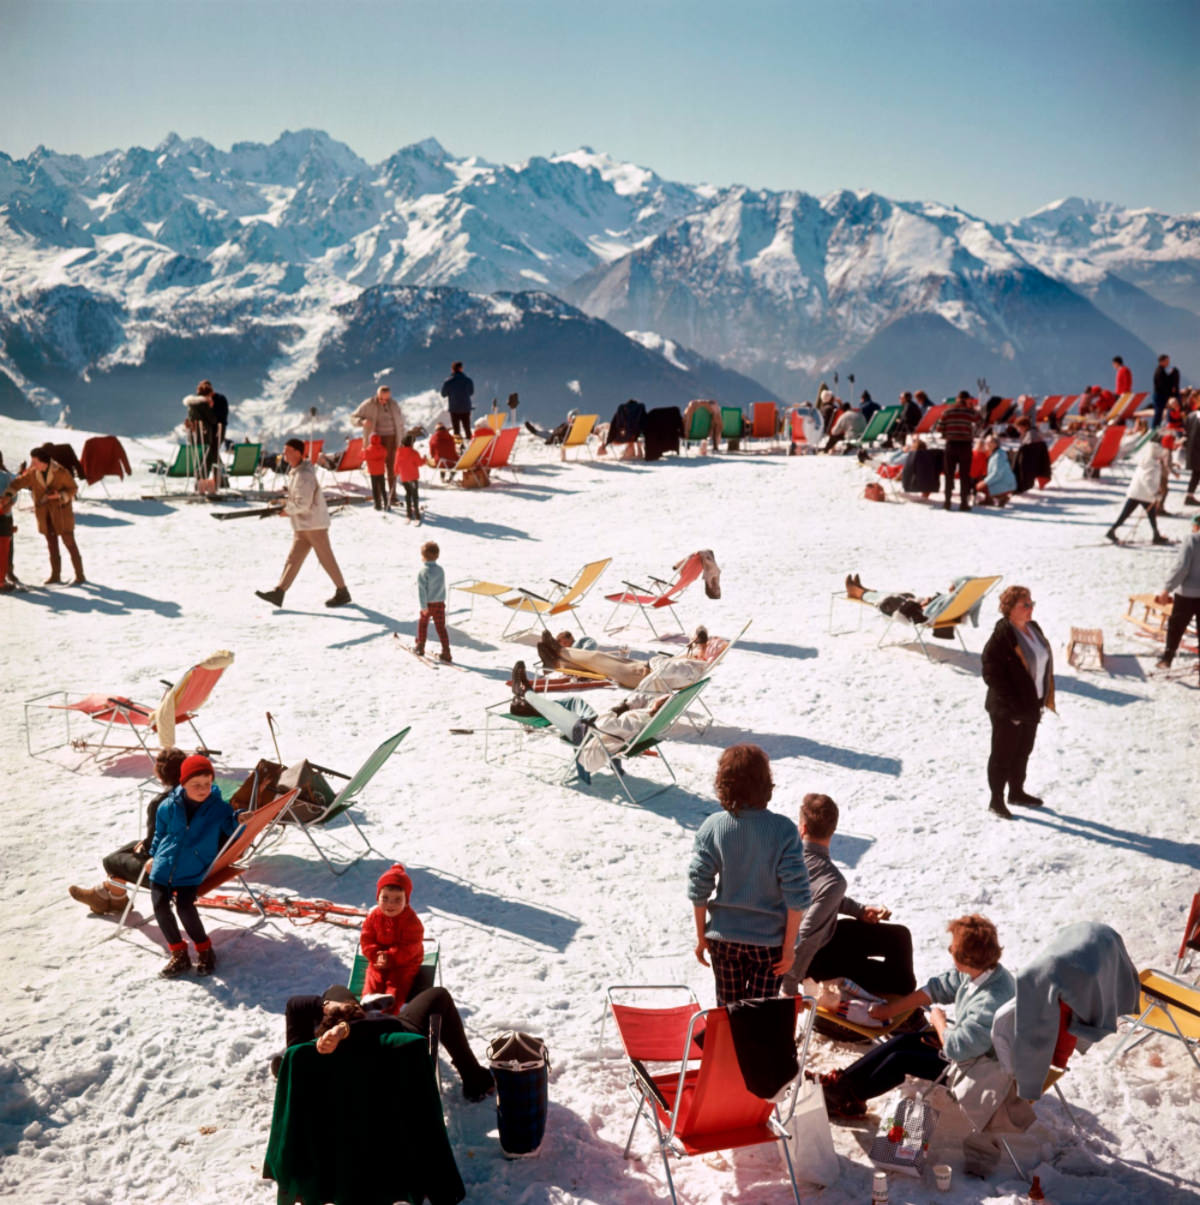 Holiday-makers take the sun on a mountain top in Verbier, 1964.